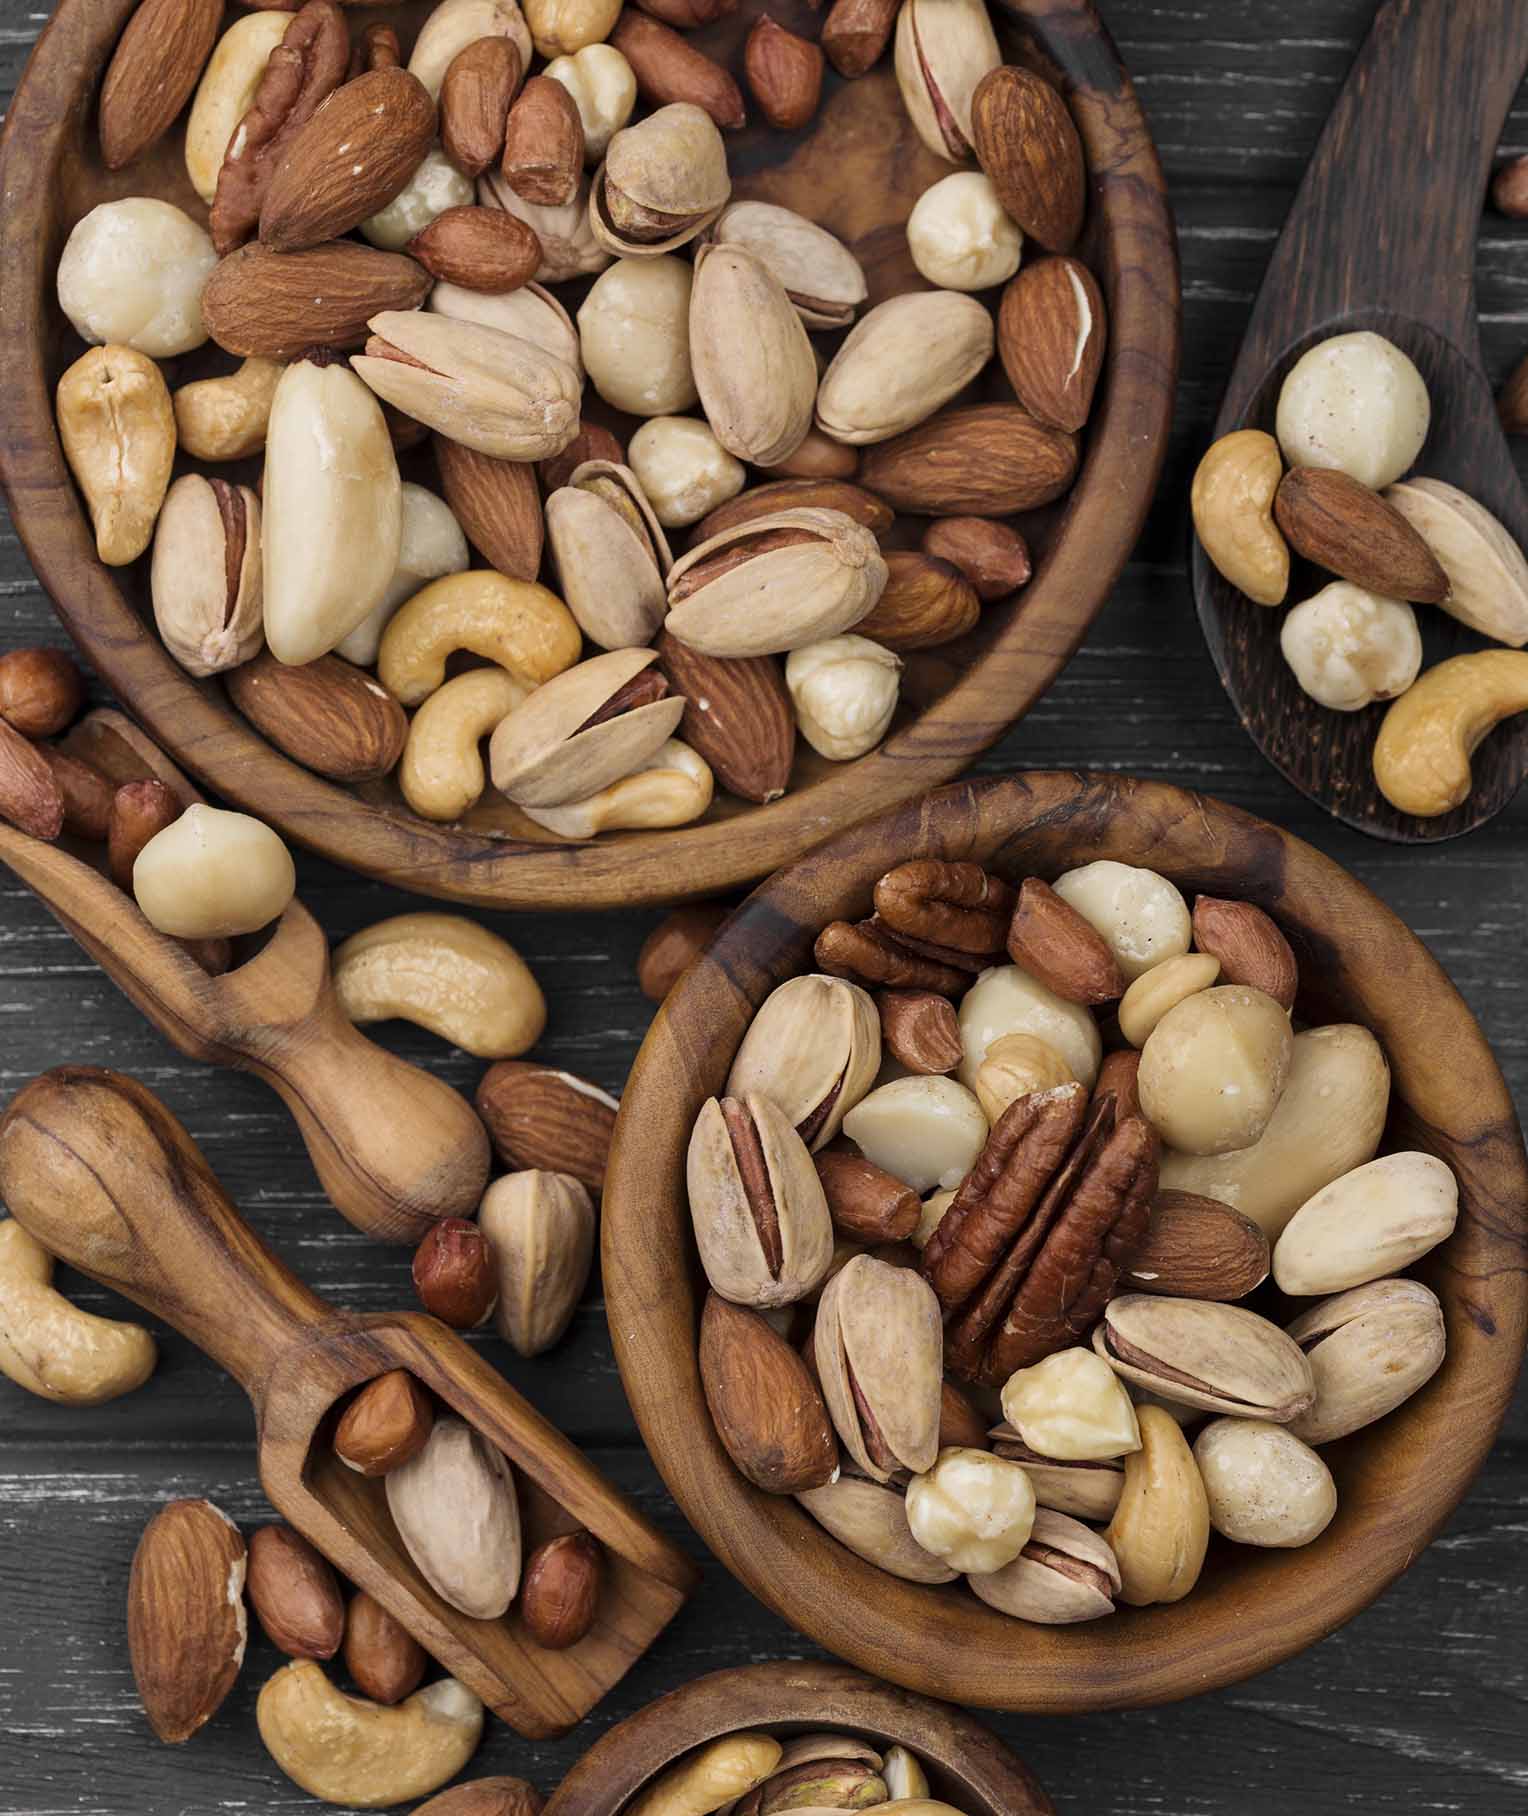 Are Pasteurized Nuts Good or Bad: Reasons Behind Nuts Pasteurization